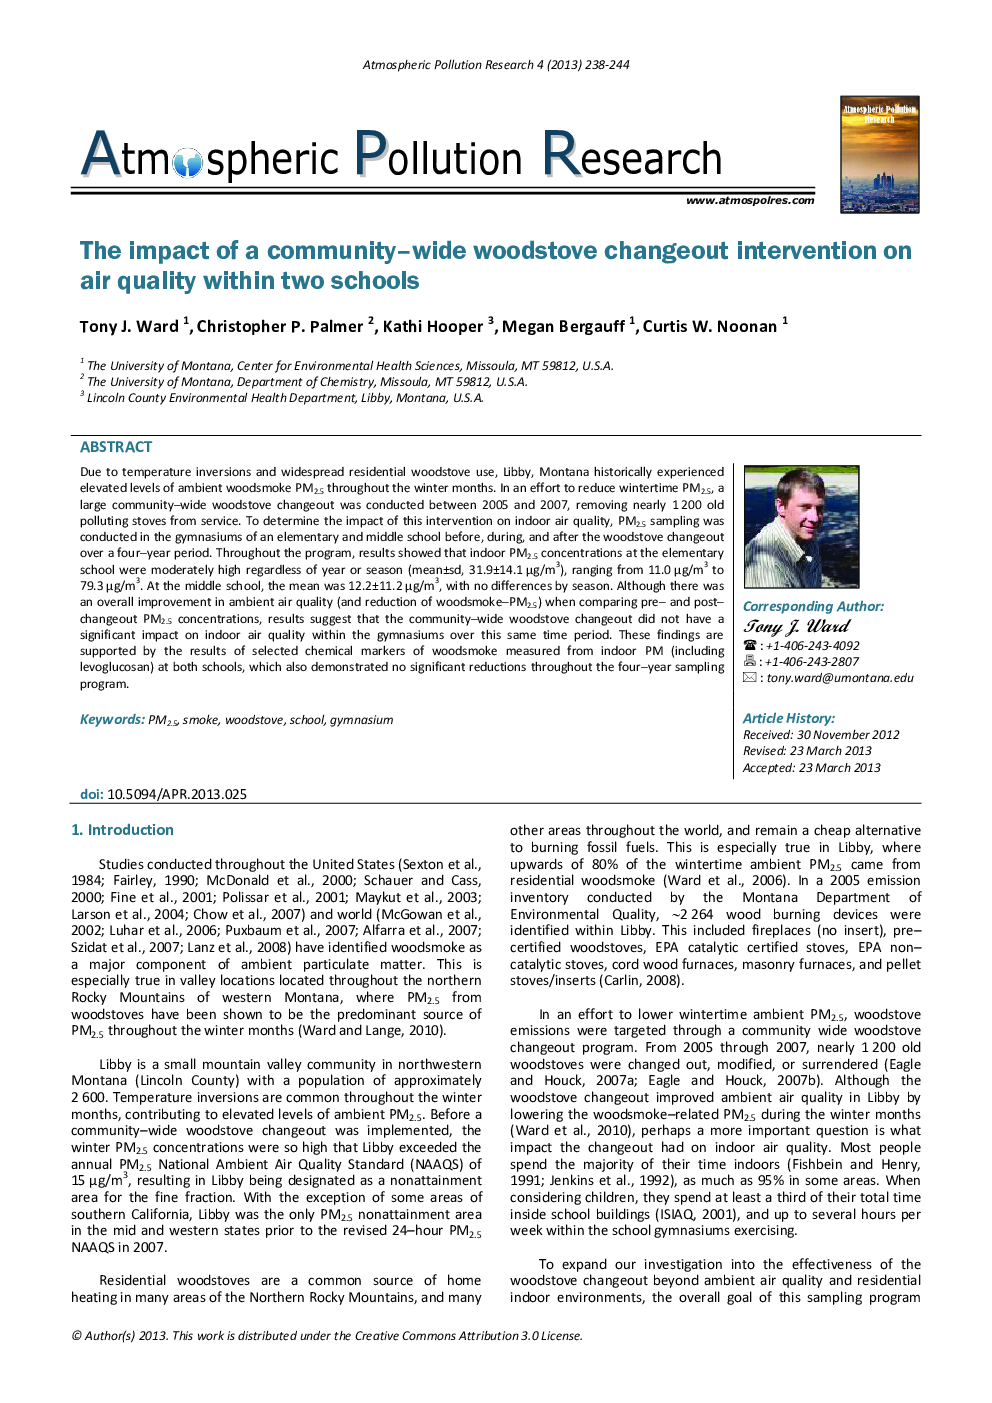 The impact of a community–wide woodstove changeout intervention on air quality within two schools